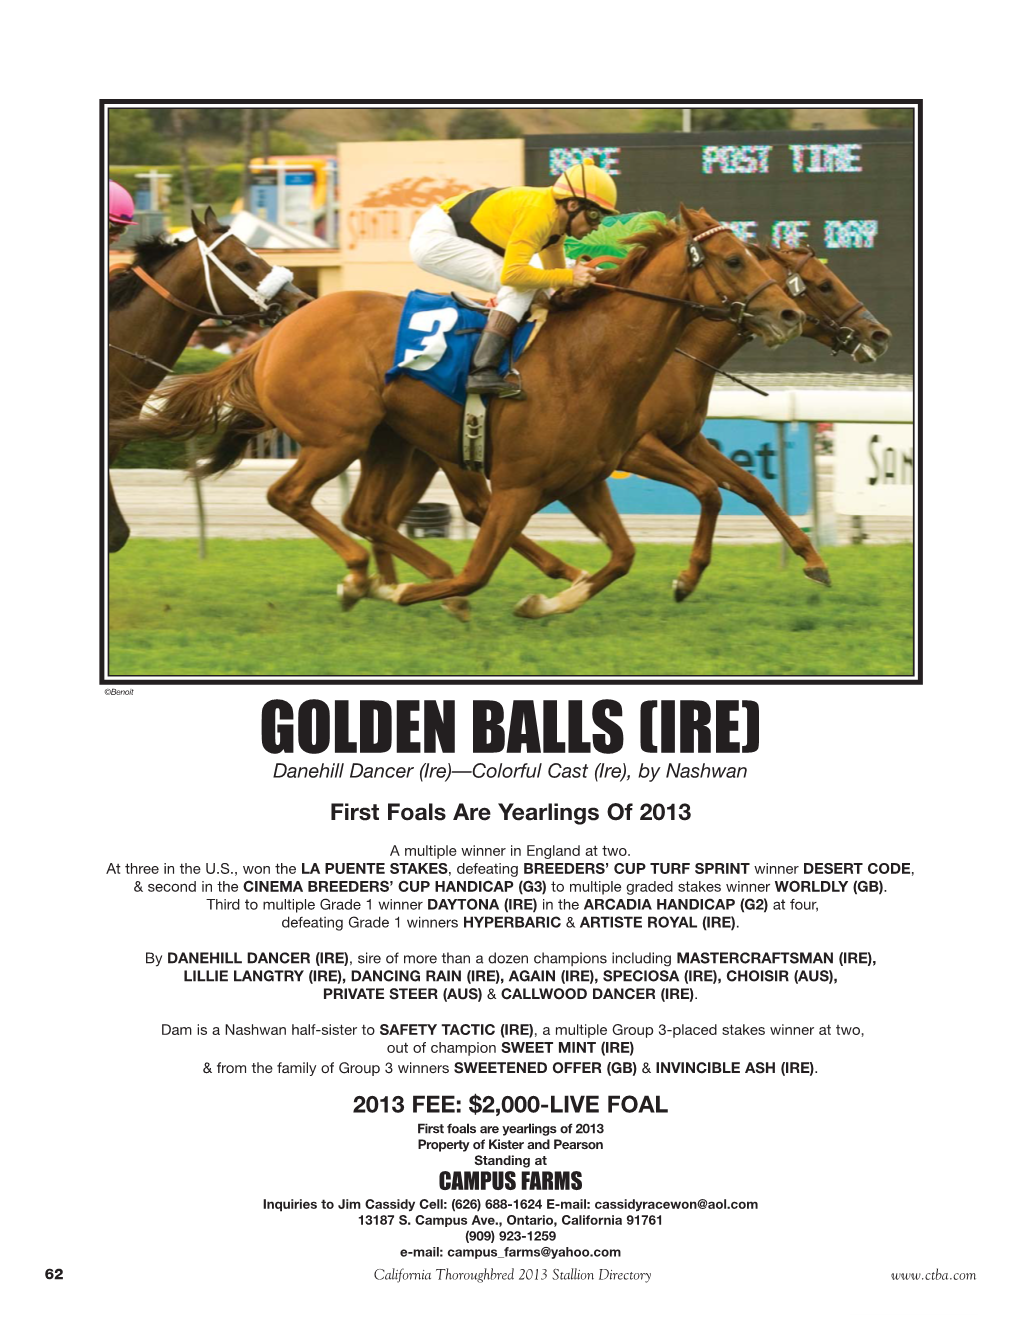 GOLDEN BALLS (IRE) Danehill Dancer (Ire)—Colorful Cast (Ire), by Nashwan First Foals Are Yearlings of 2013